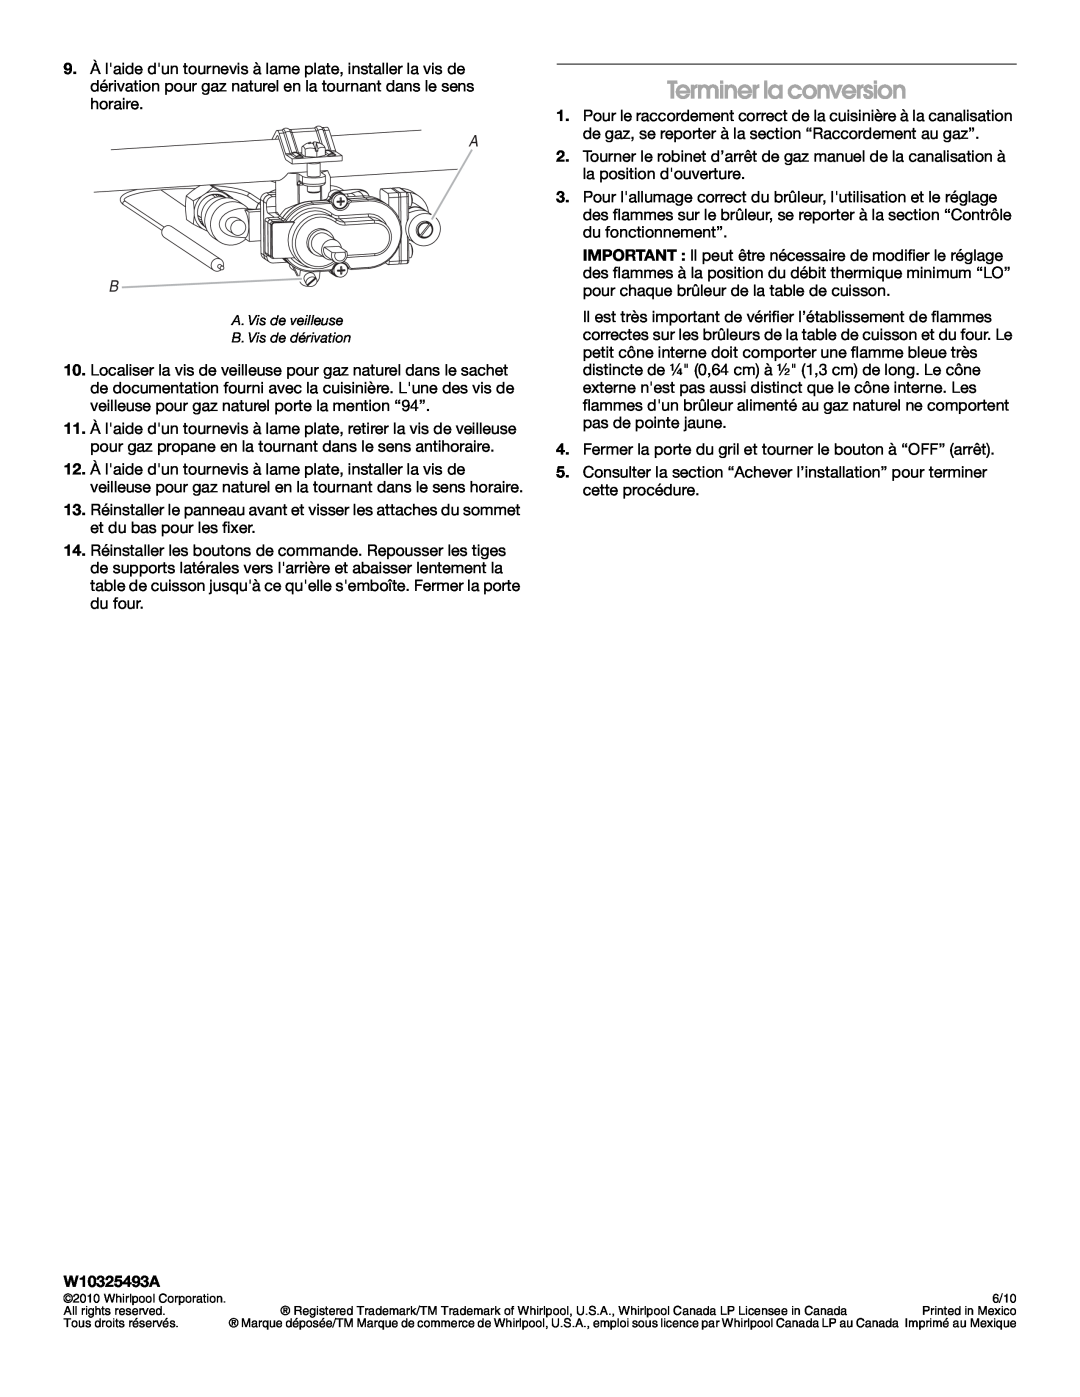 Whirlpool W10325493A Terminer la conversion, Whirlpool Corporation, 6/10, All rights reserved, Tous droits réservés 